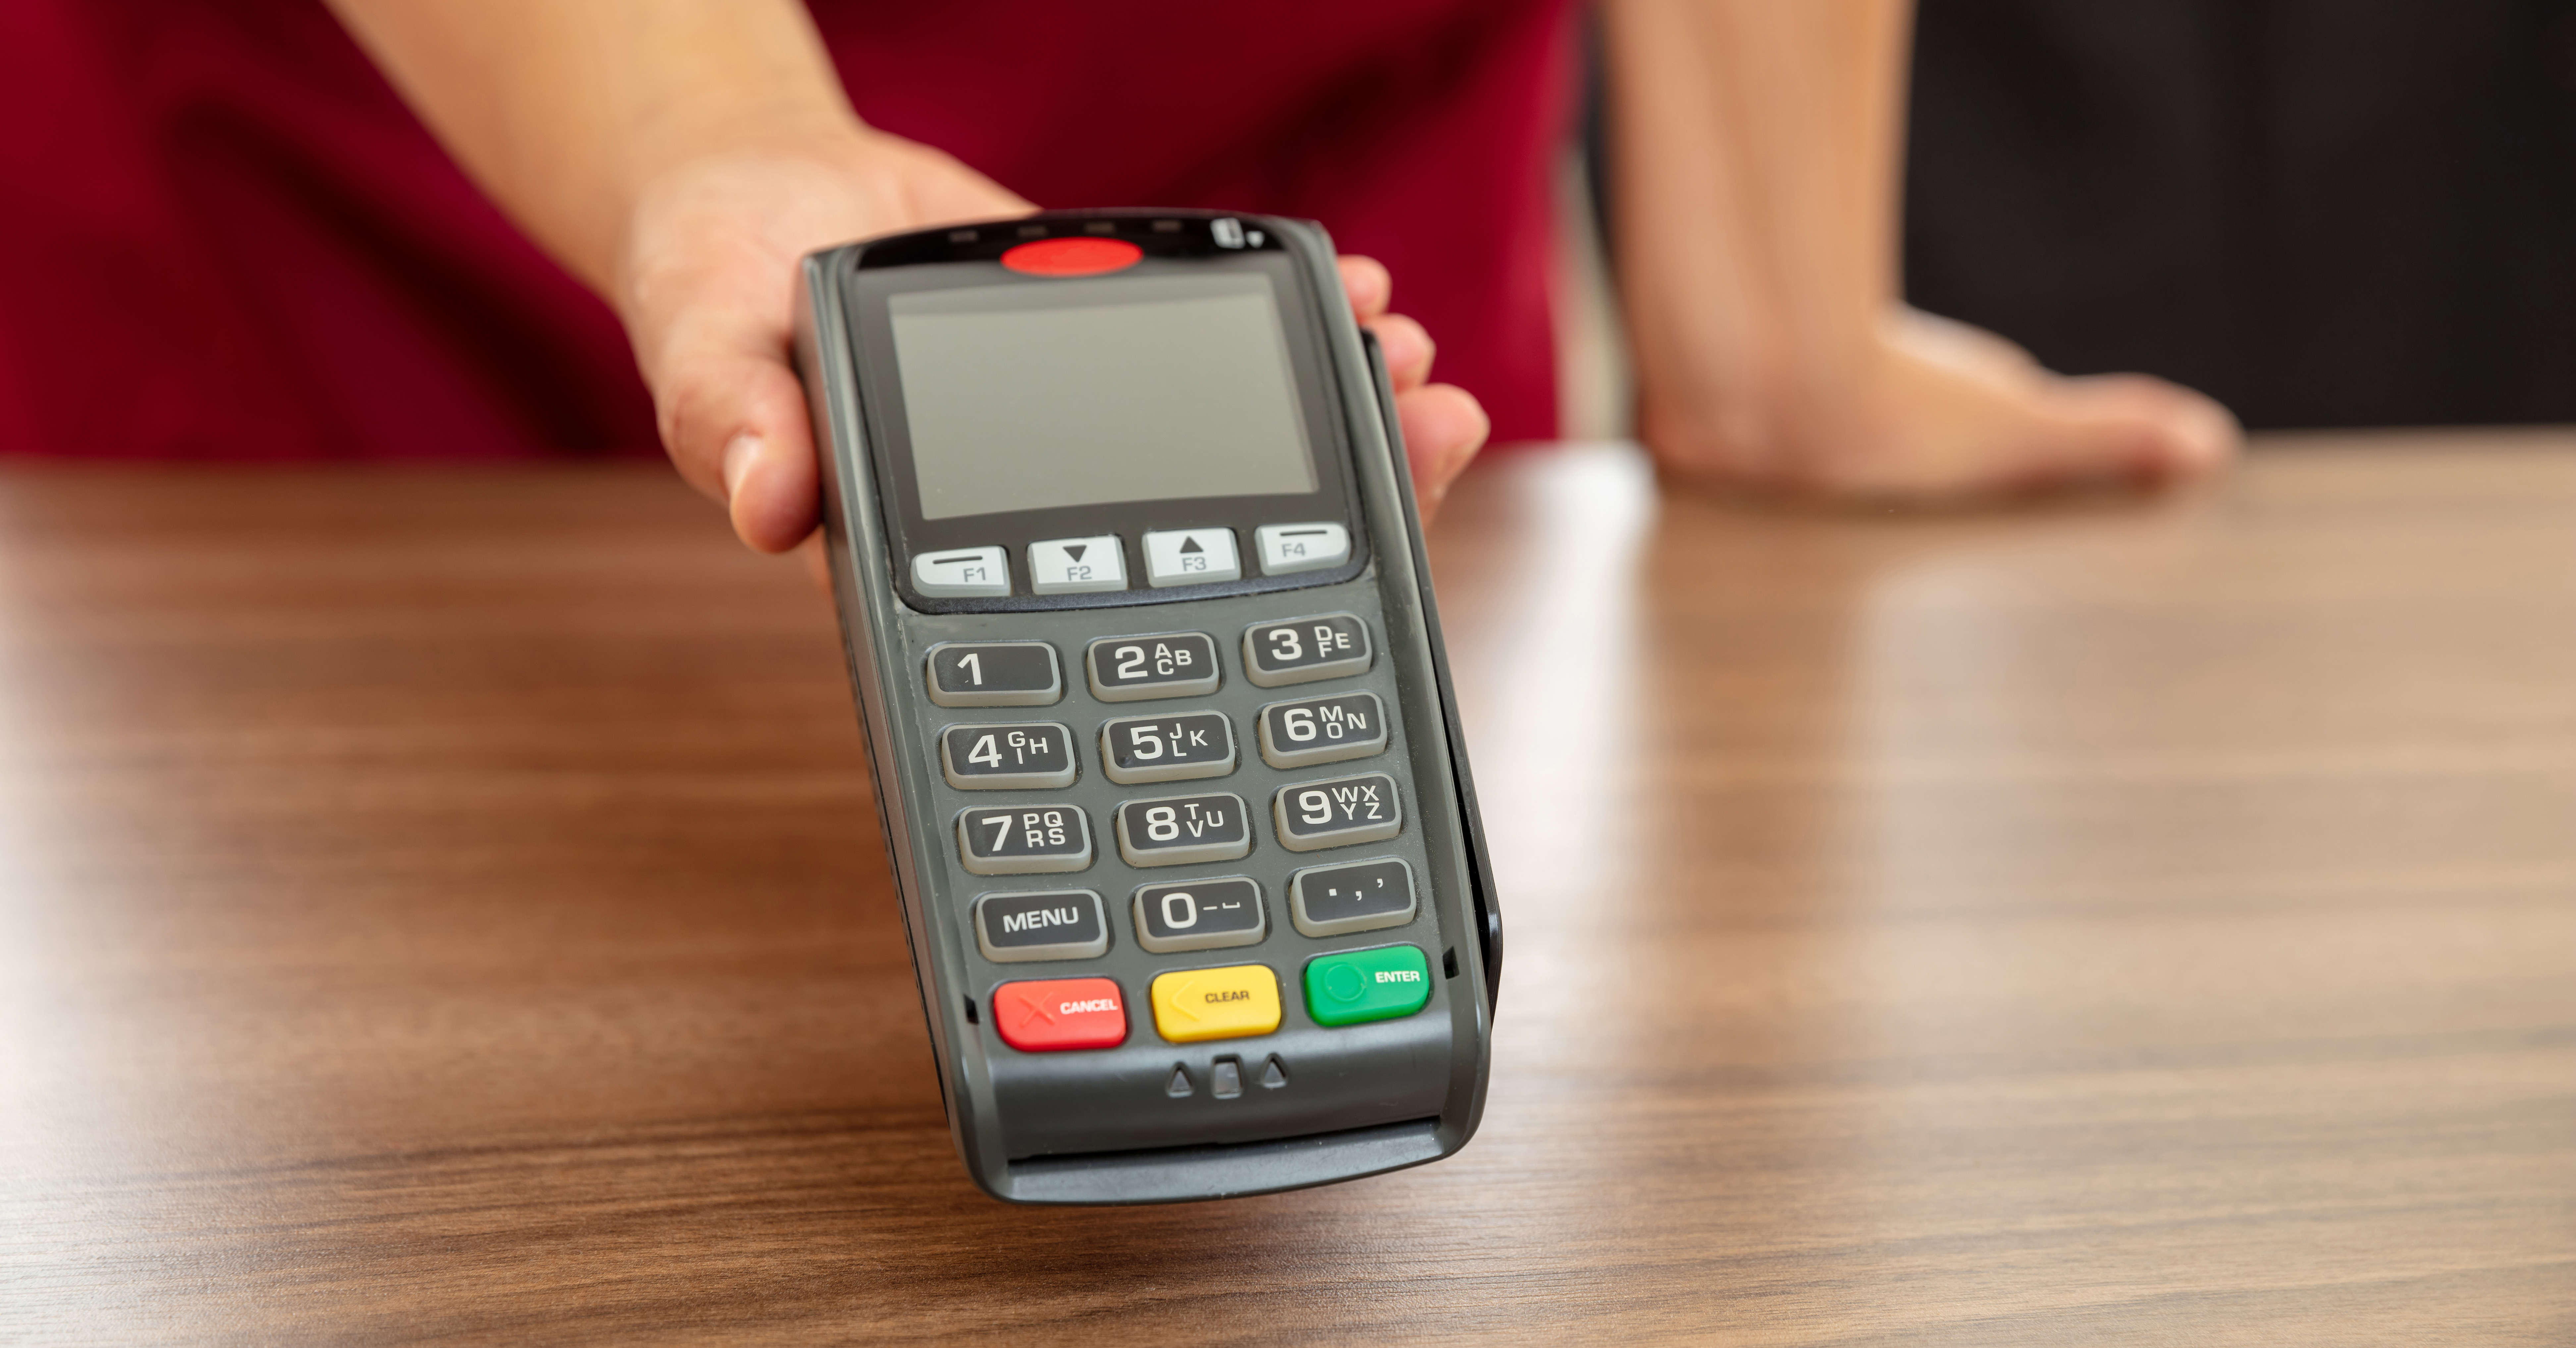 Cashier offers POS terminal for payment with credit card. Banking, shopping and contactless payment with NFC technology concept.